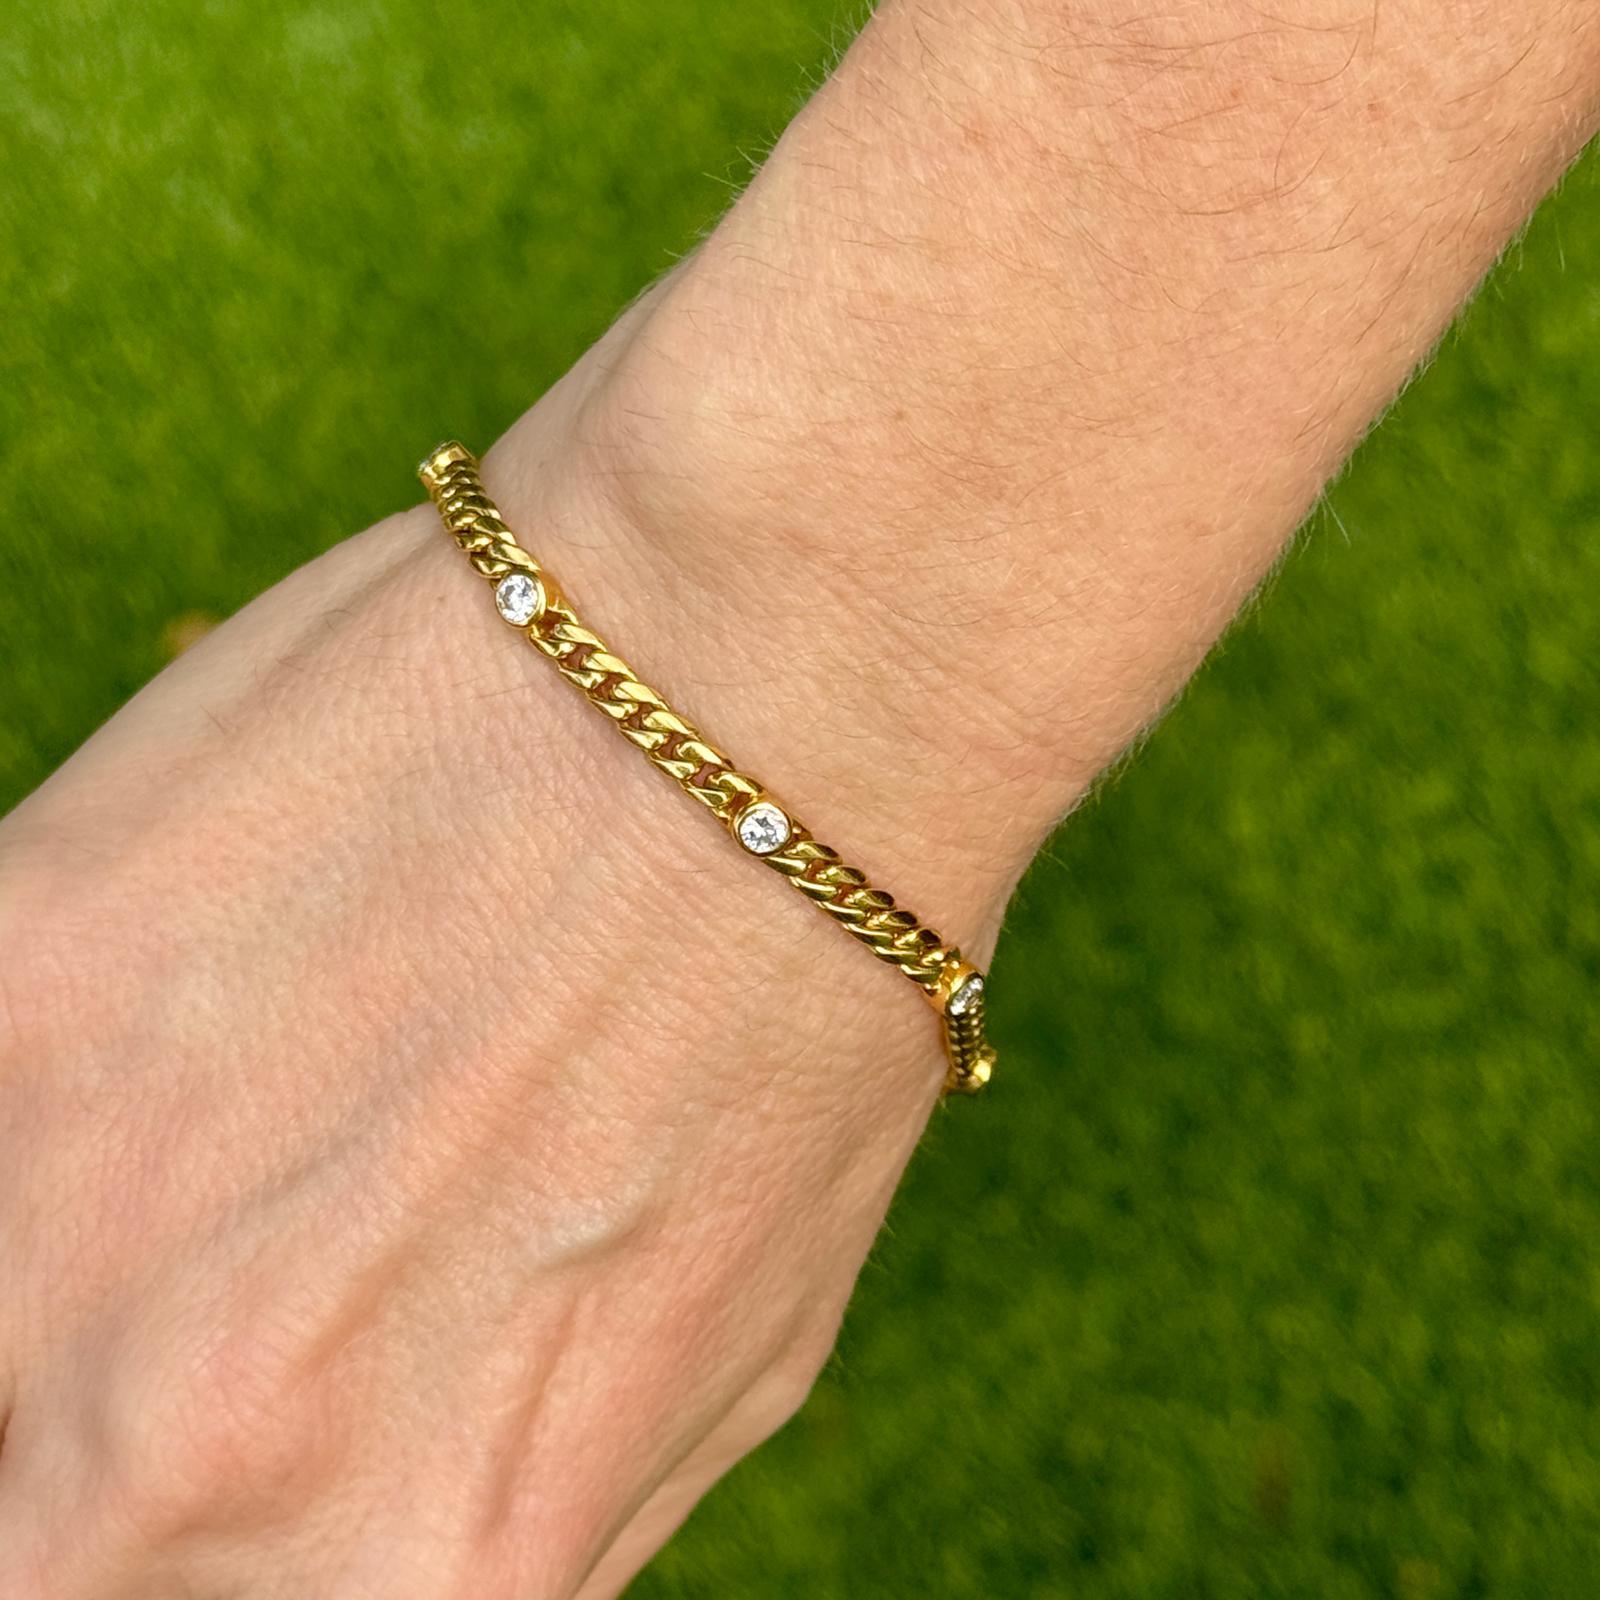 Diamond by the yard curb link bracelet crafted in 18 karat yellow gold.. The bracelet features 8 bezel set round brilliant cut diamonds weighing approximately 1.00 carat total weight. The diamonds are graded G-H color and SI1 clarity. The bracelet